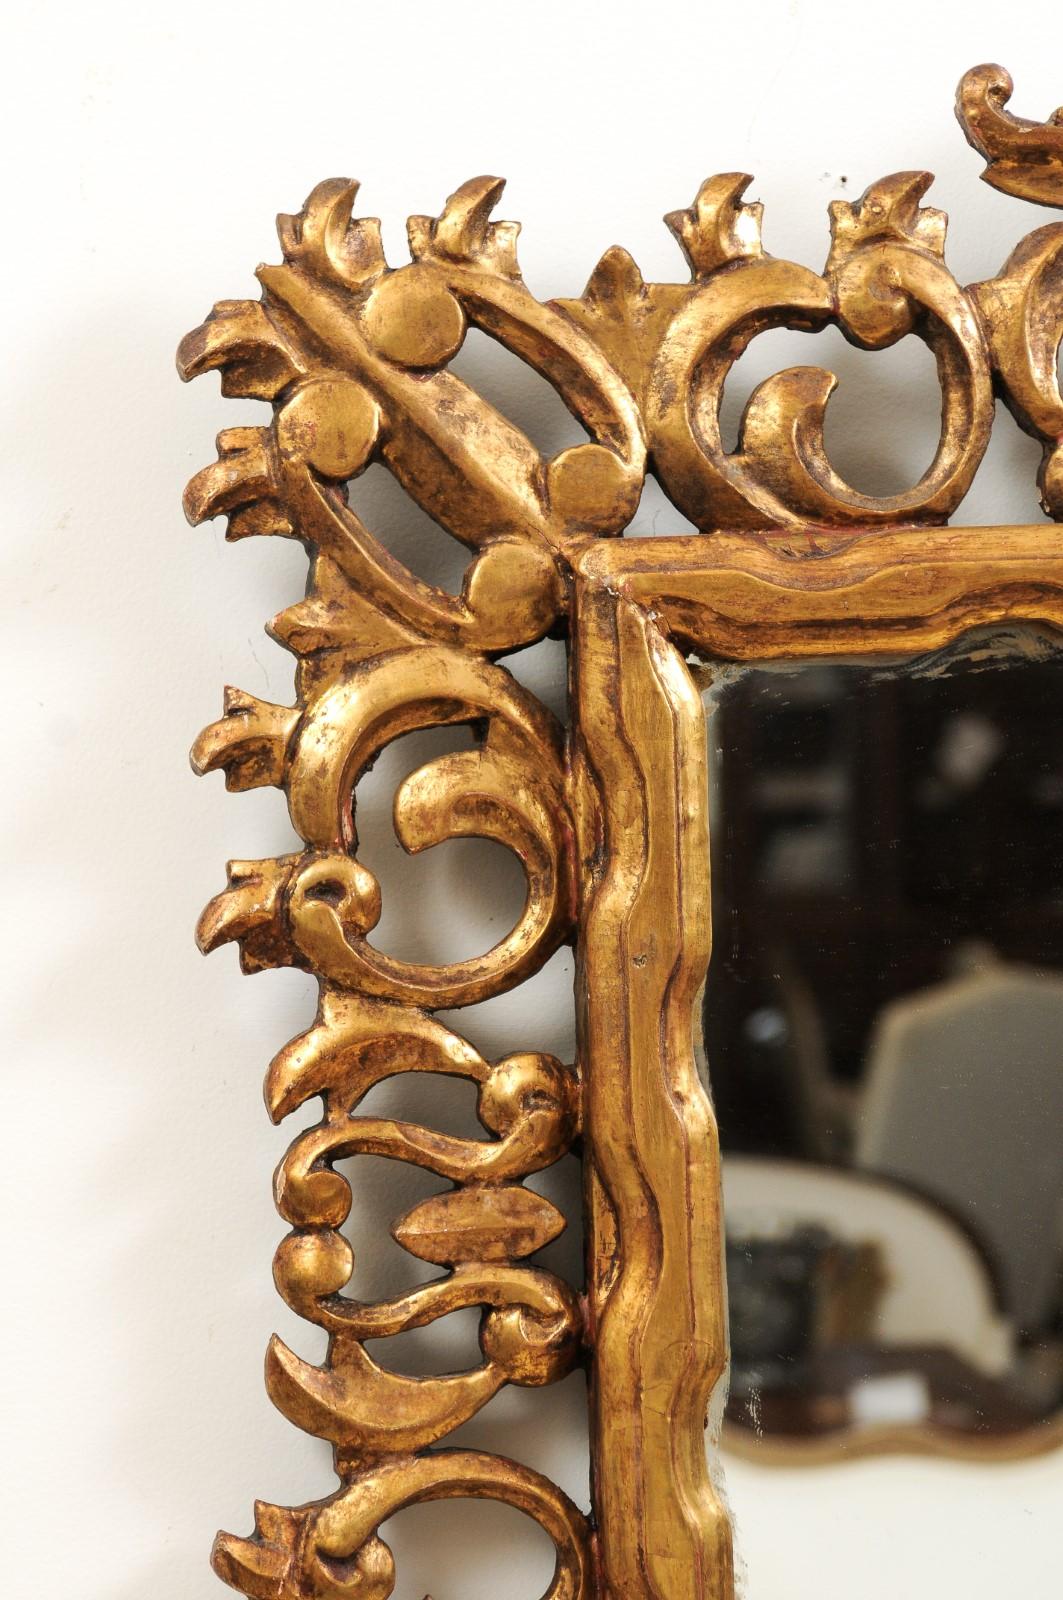 Florentine 20th Century Carved Giltwood Mirror with C-Scrolls and Foliage Motifs For Sale 3